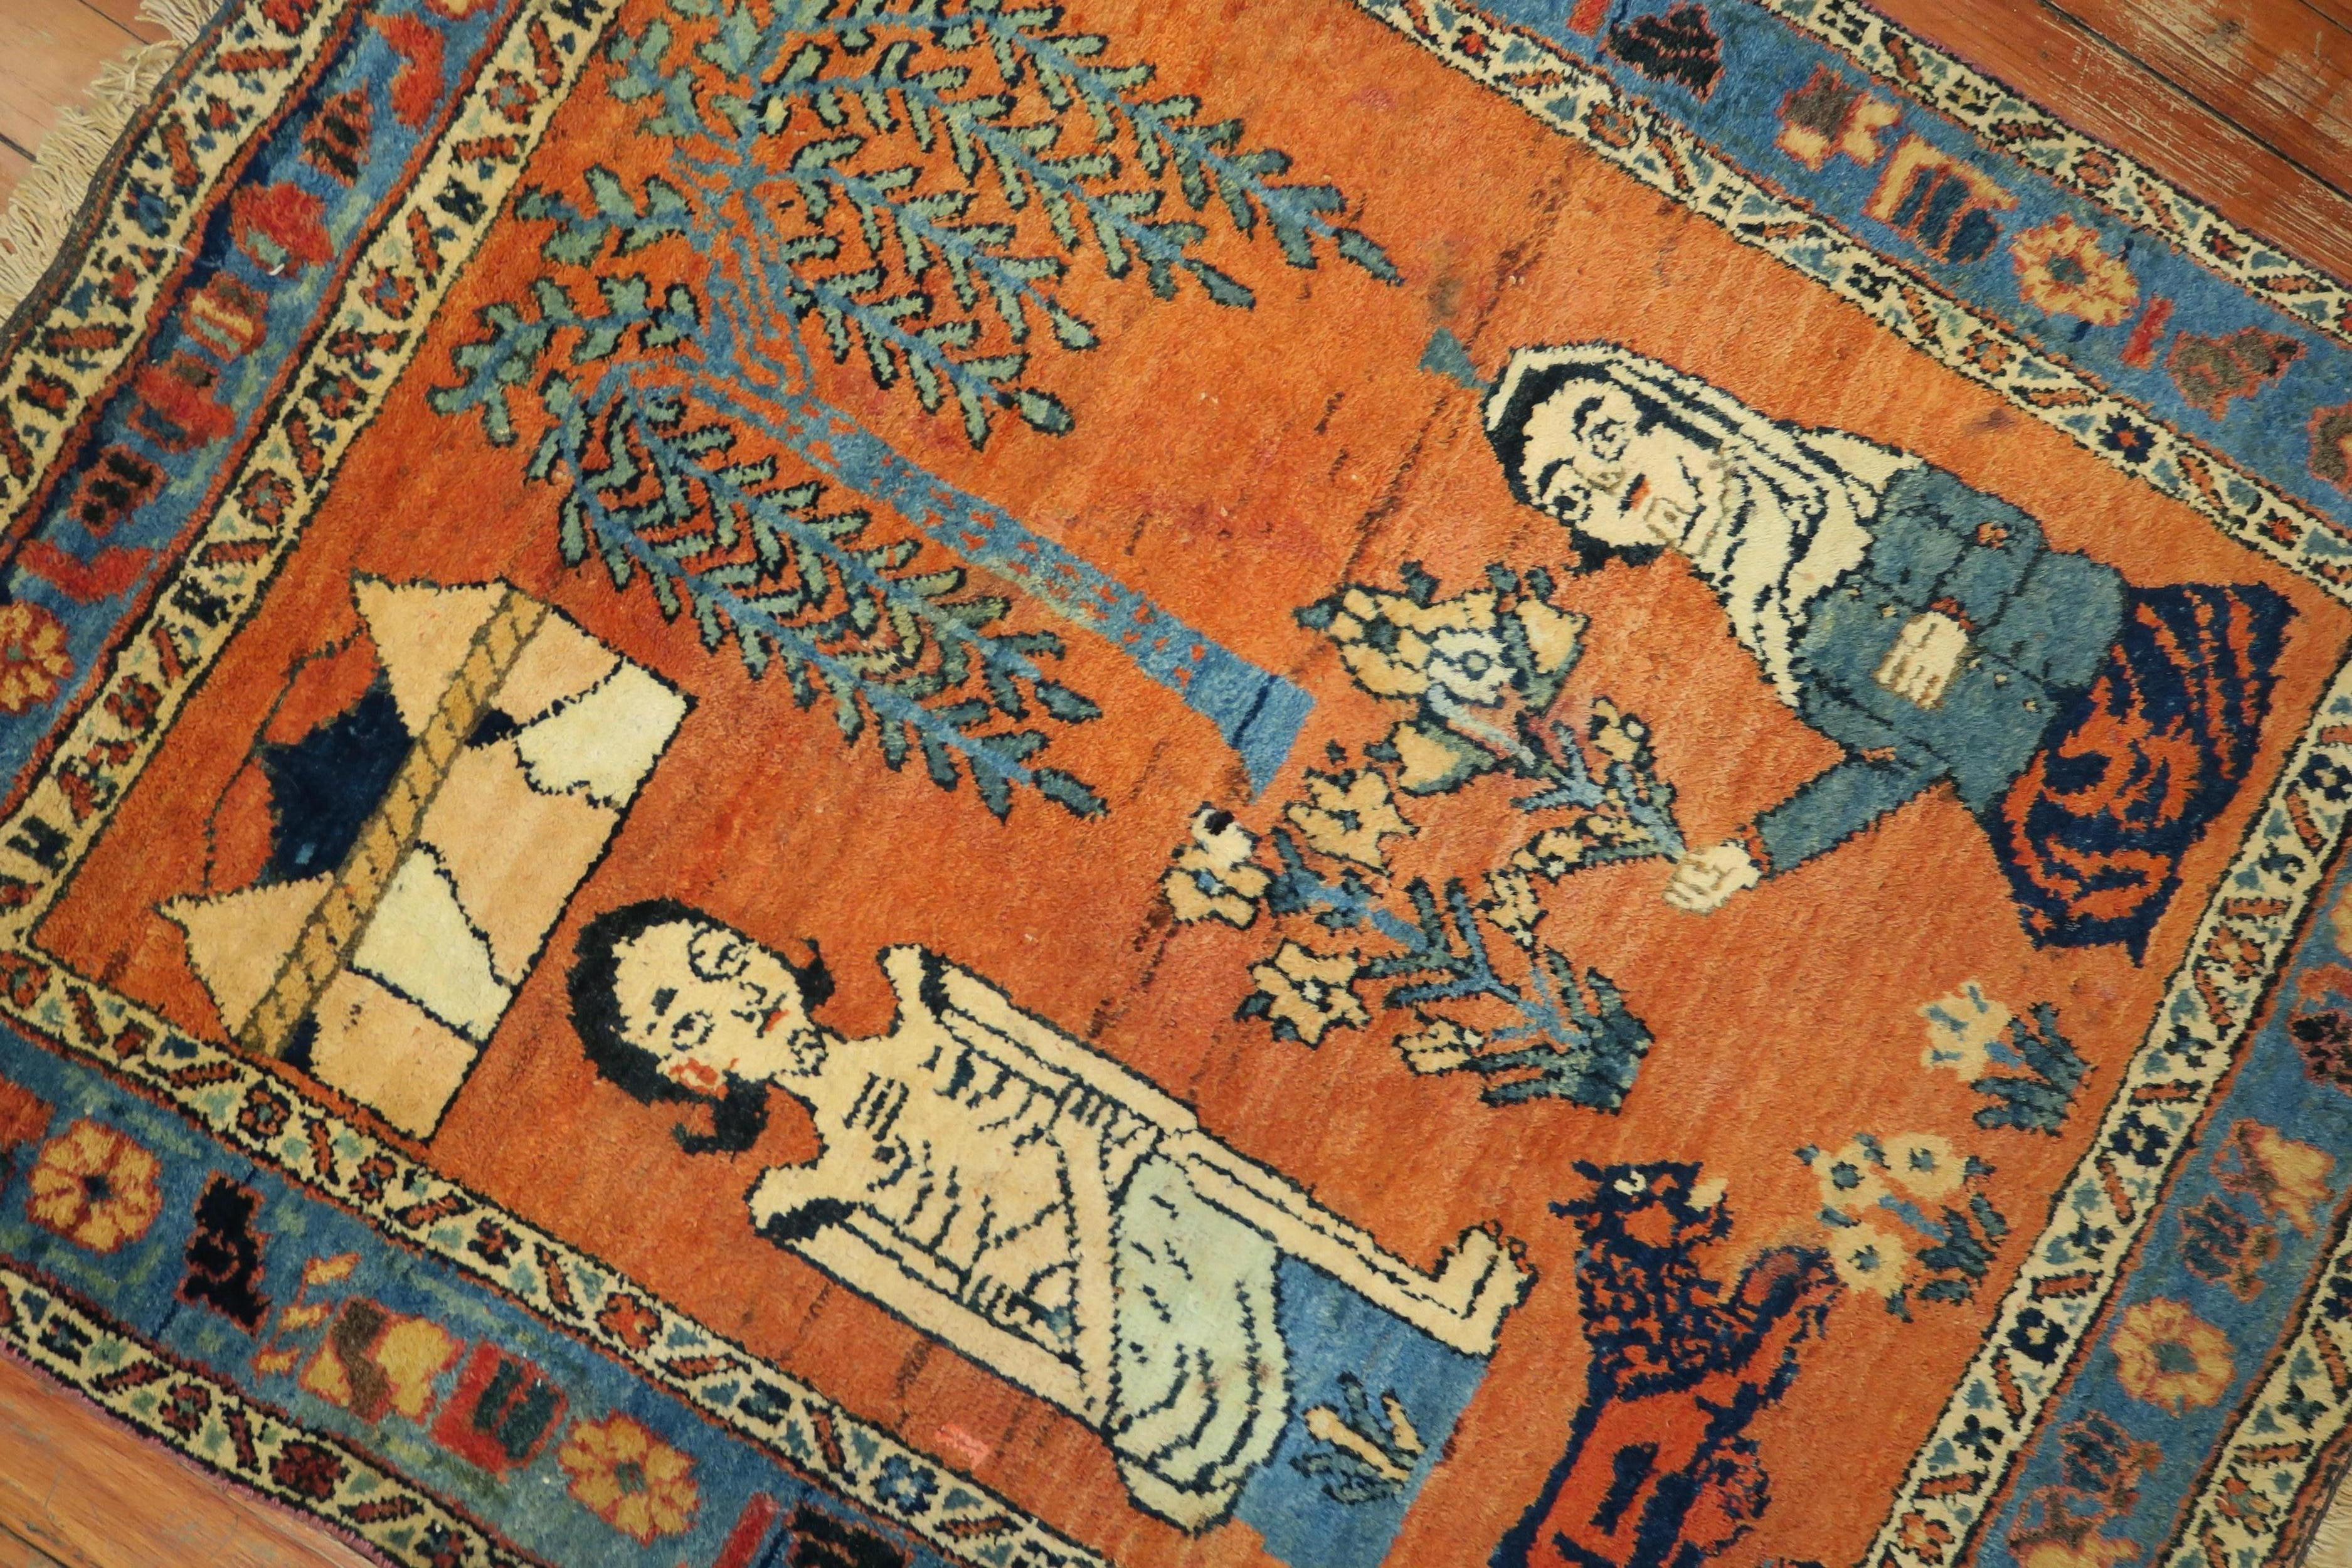 One of a kind mid-20th century decorative Northwest Persian Pictorial rug with 2 women and a dog on a pumpkin color field. 

Measures: 2'6